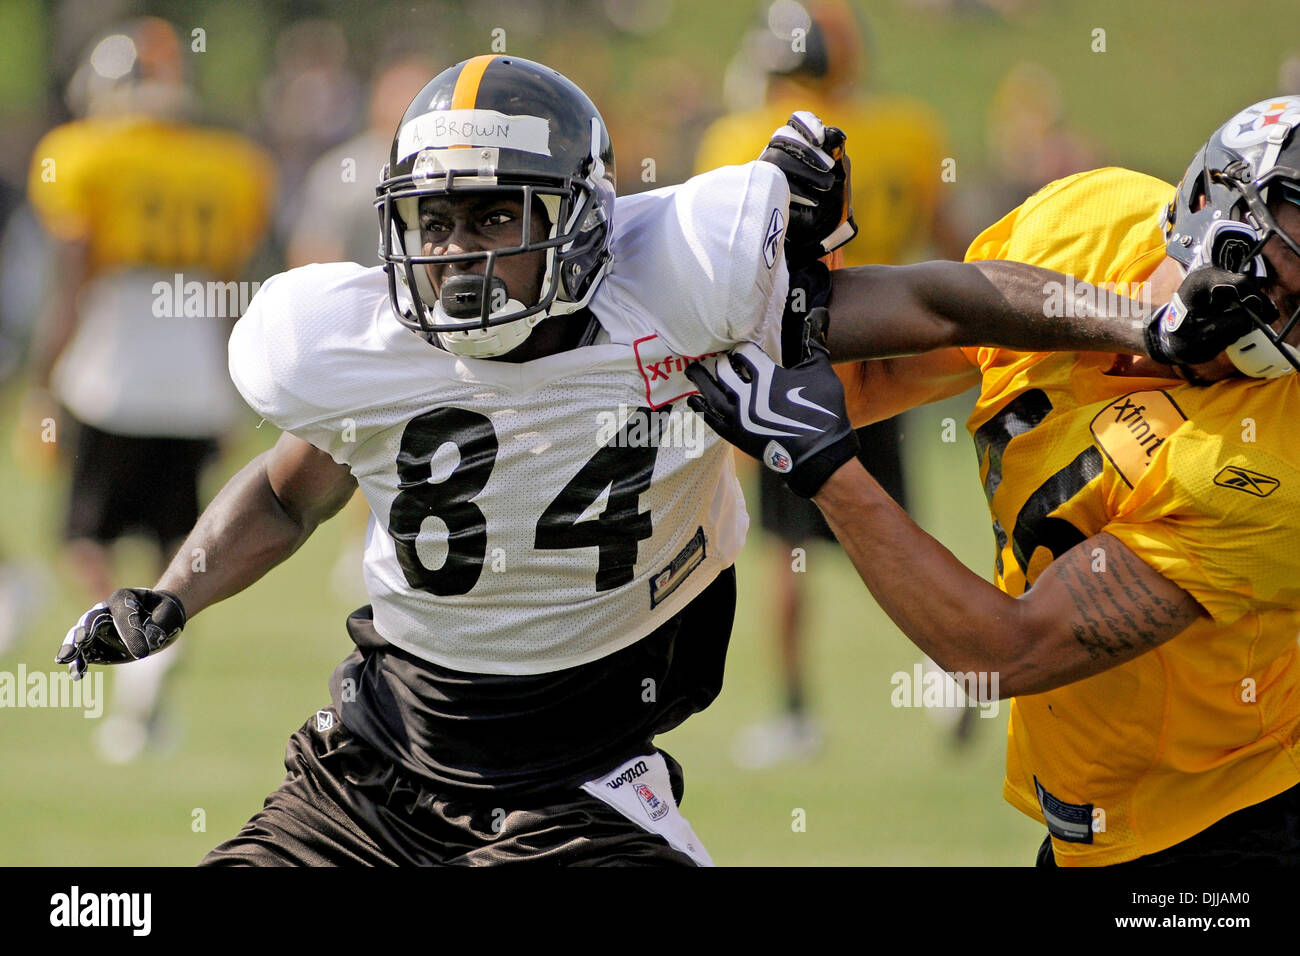 Aug. 09, 2010 - Latrobe, PENNSYLVANNIA, United States of America - 09 August, 2010: Pittsburgh Steelers' wide receiver ANTONIO BROWN (84) stiff arms Pittsburgh Steelers' safety JUSTIN THORNTON (46) during a an offense / defense drill during training camp at St. Vincent College in Latrobe, PA...MANDATORY CREDIT: DEAN BEATTIE / SOUTHCREEK GLOBAL (Credit Image: Â© Southcreek Global/ZU Stock Photo